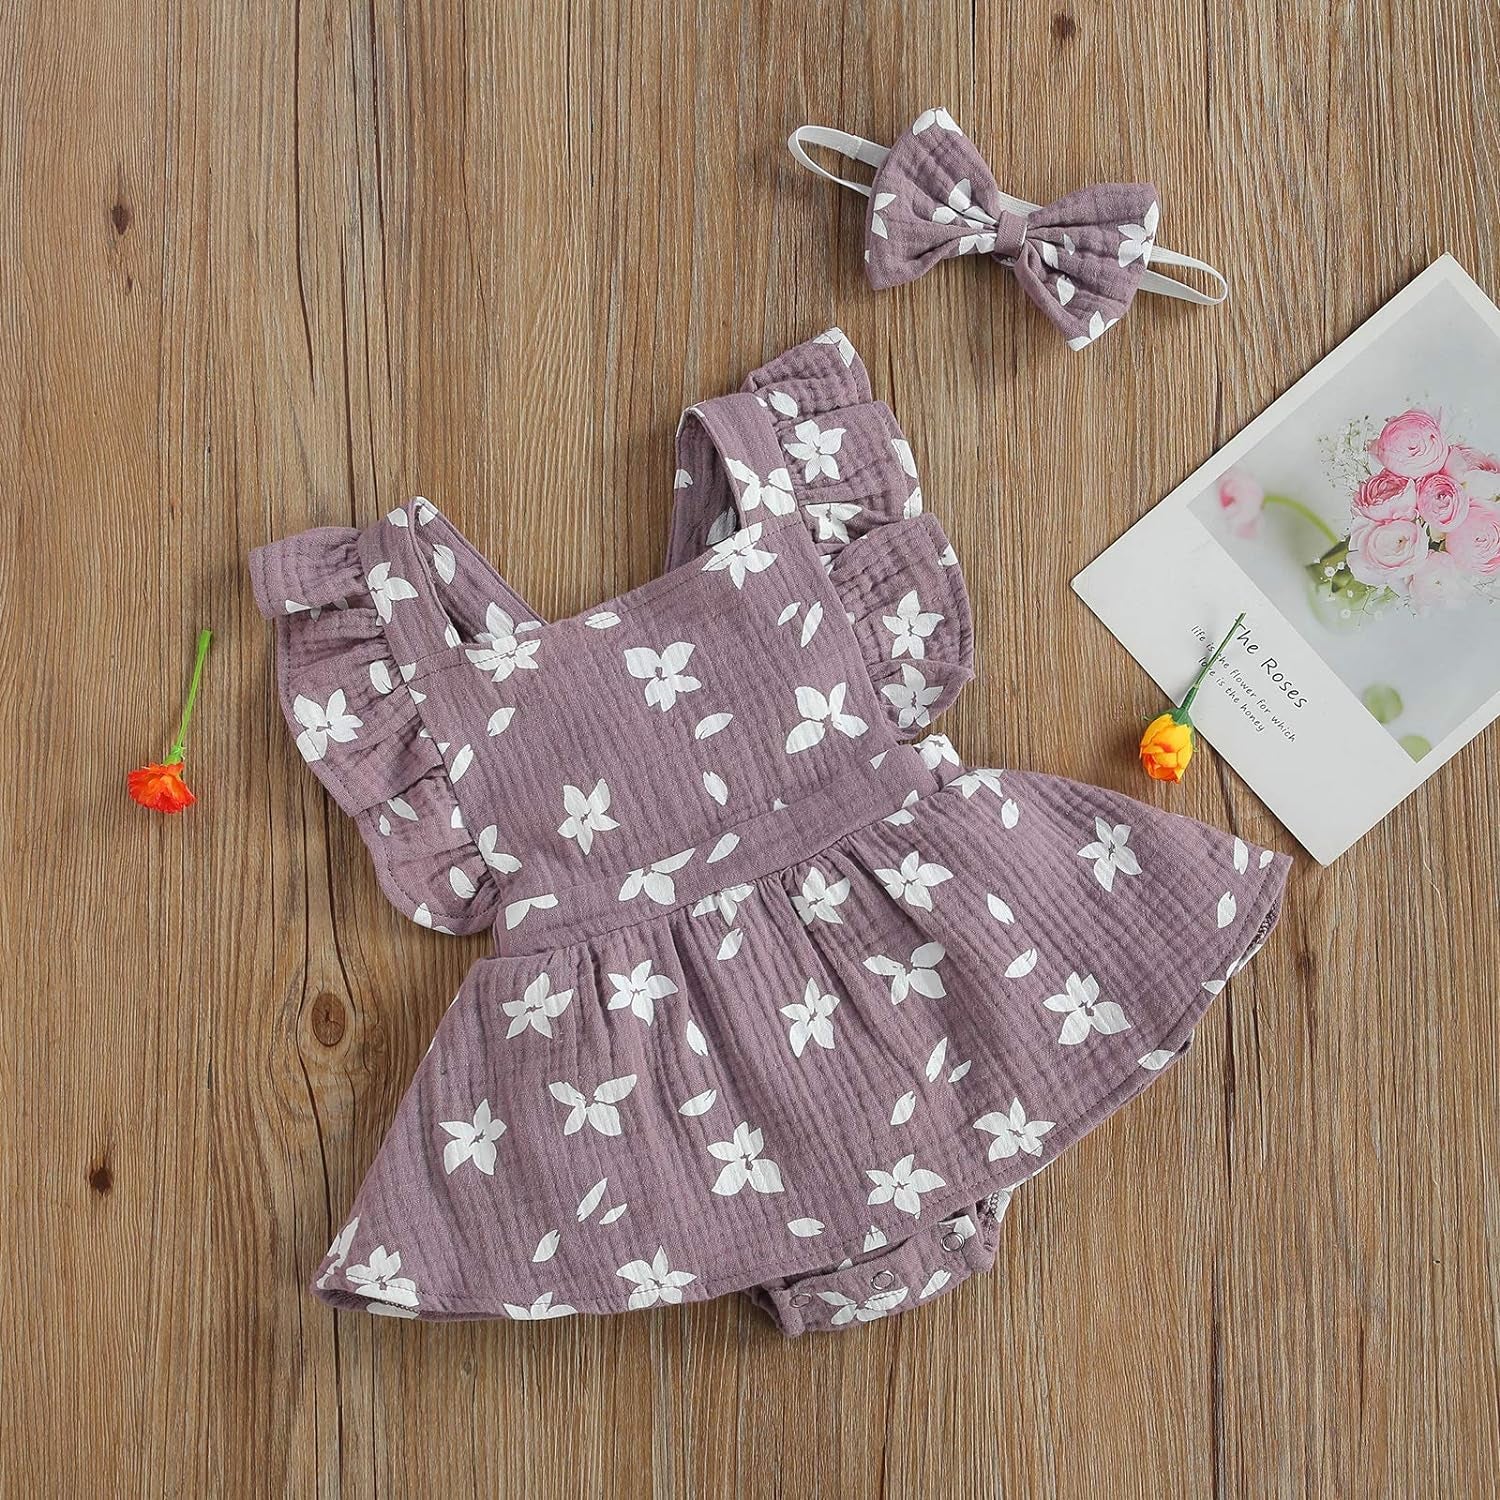 Infant Summer Clothes: Baby Girls Floral Jumpsuit with Ruffled Bodysuit, Fly Sleeve Romper, and Headband